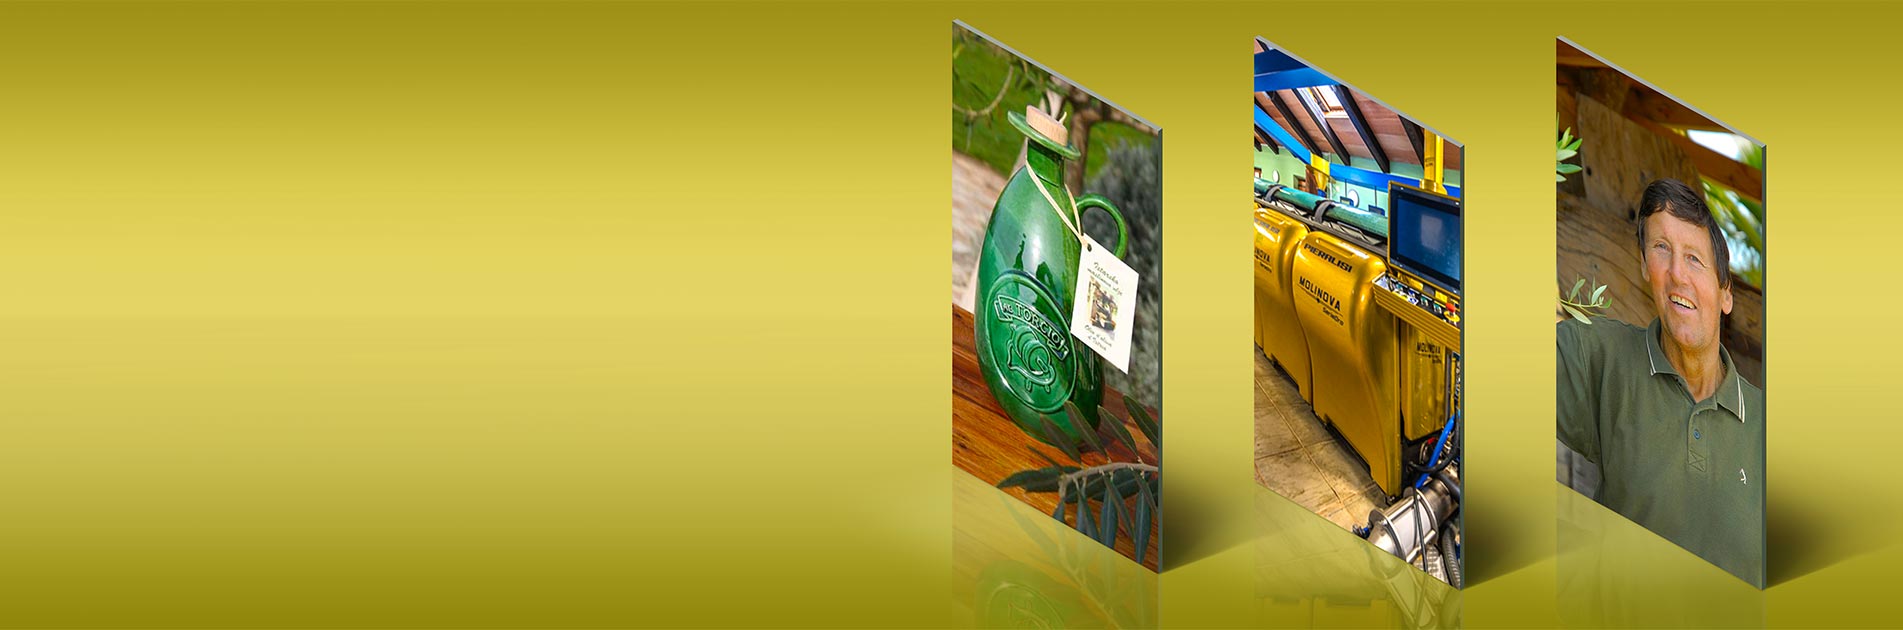 Extra virgin olive oil of the highest quality Istrian olive oil!